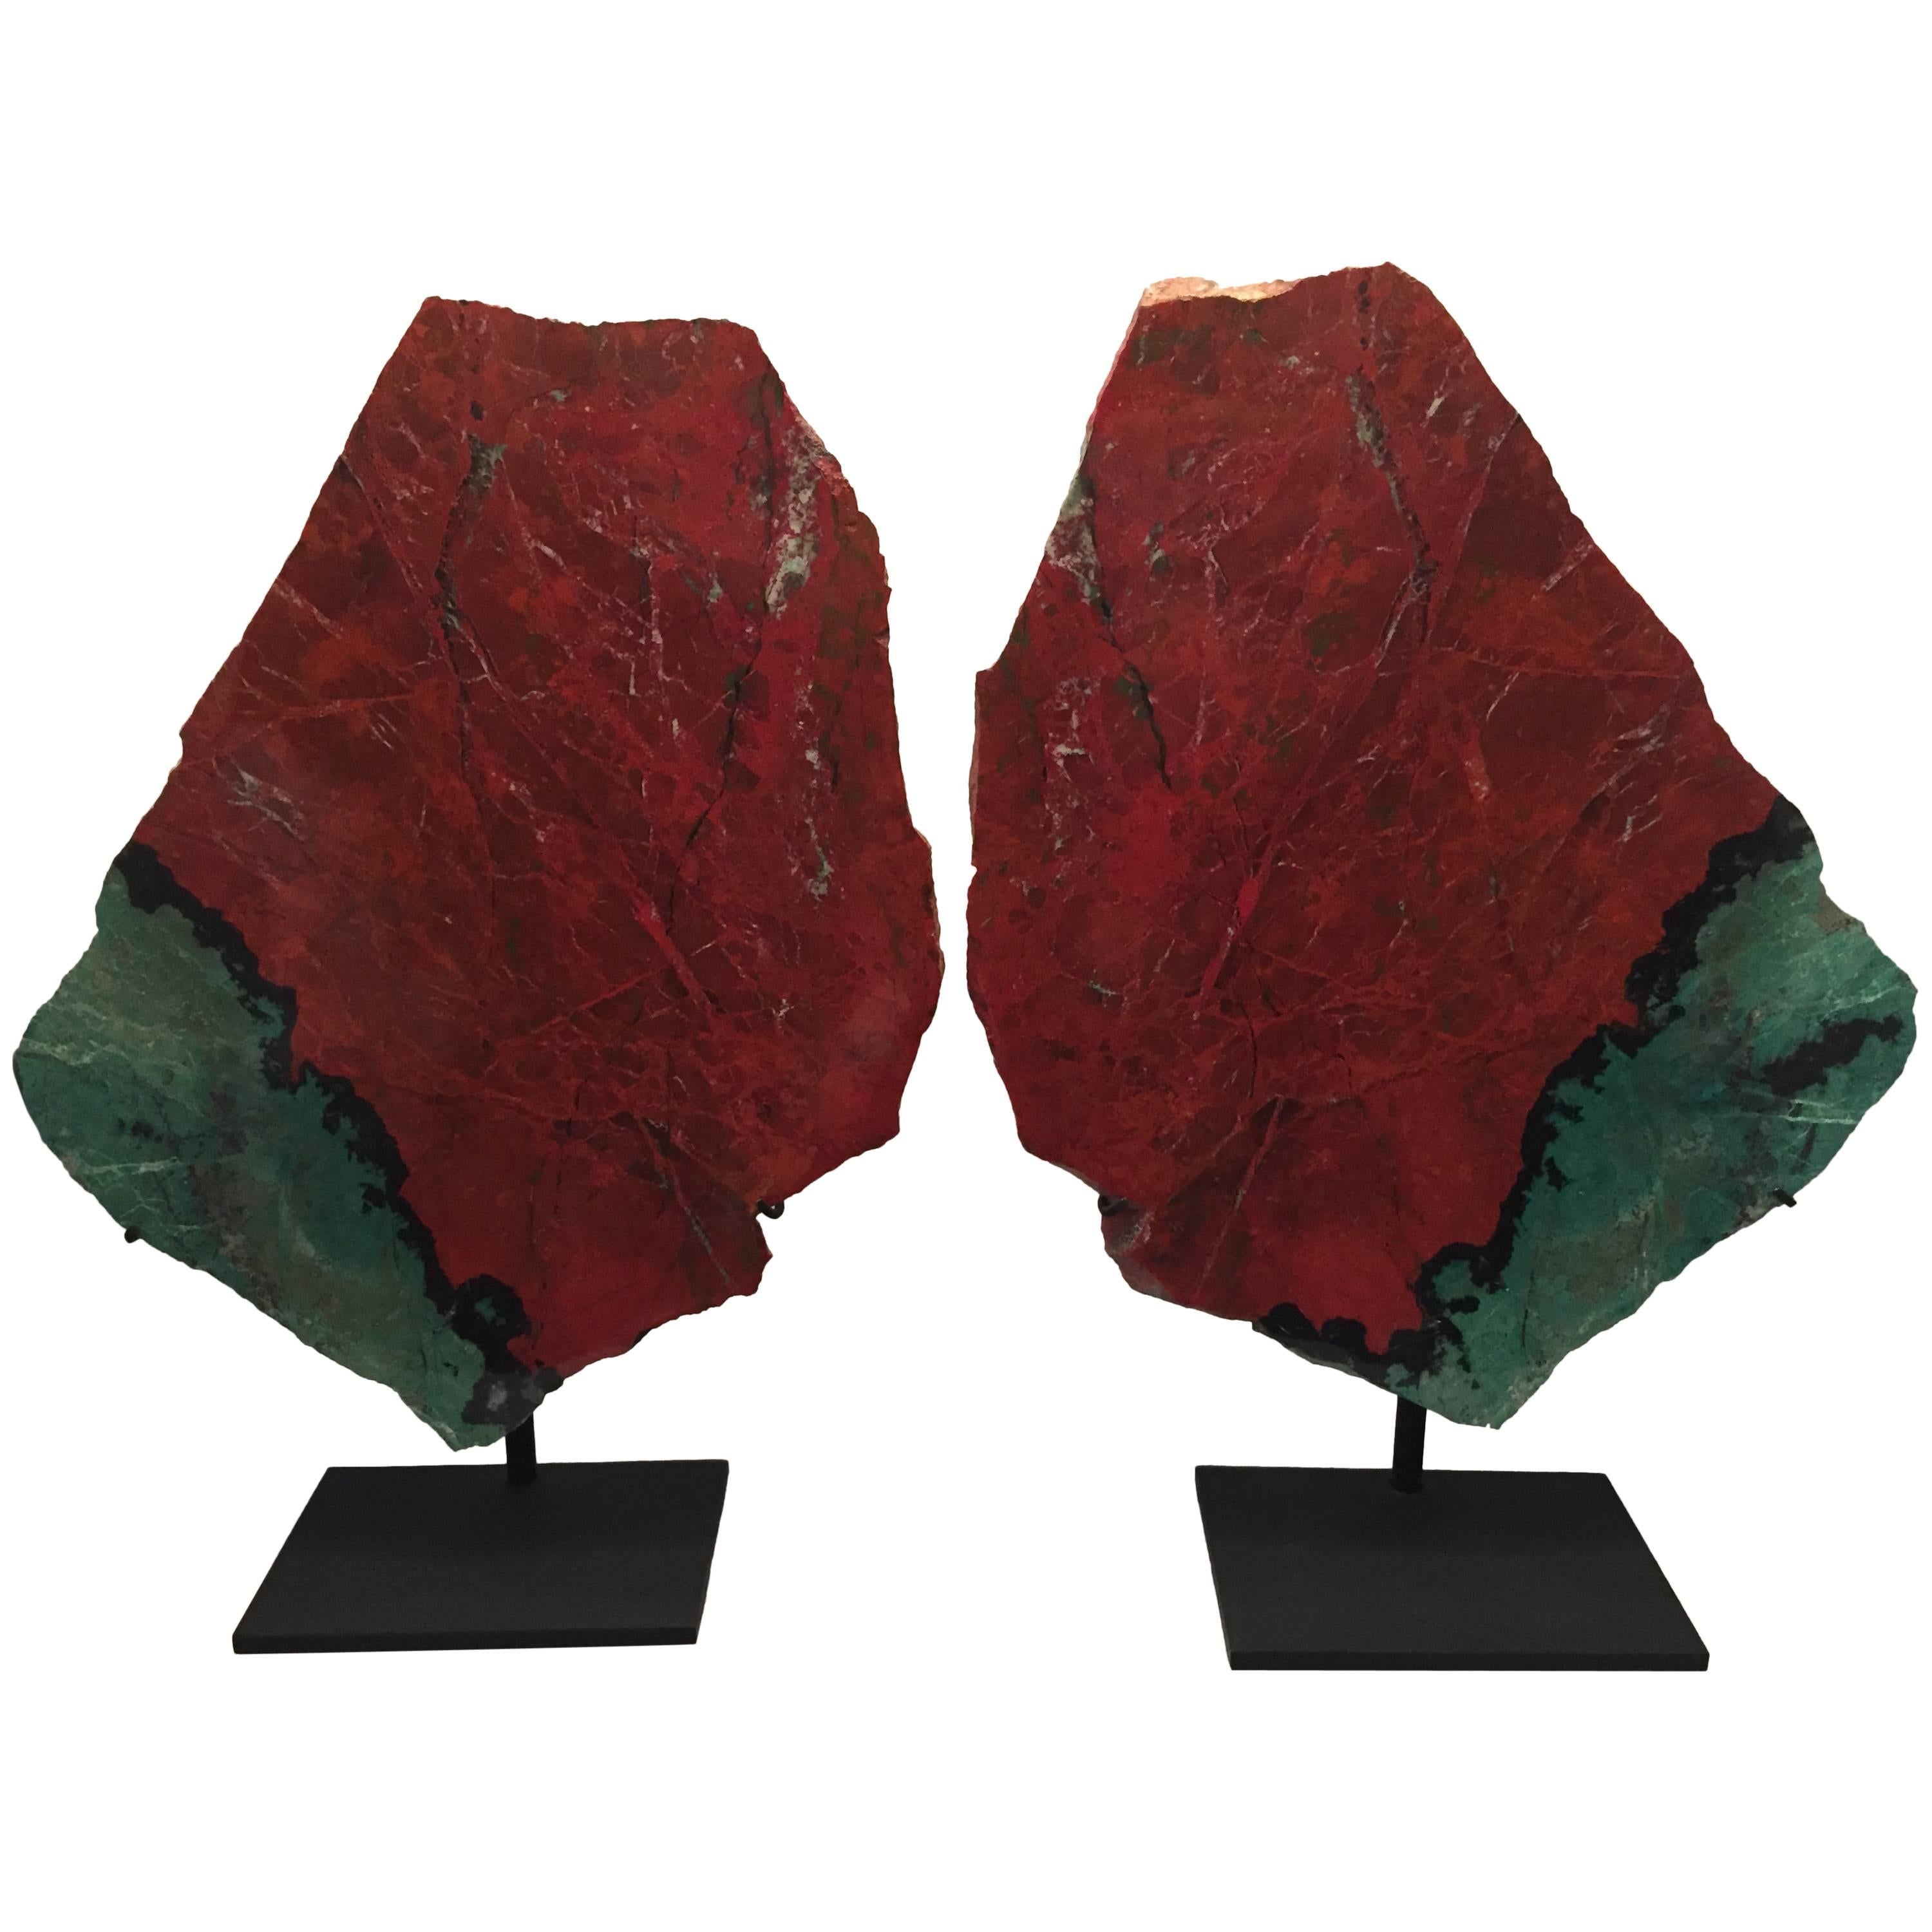 Large Bookmatched Pair of Mounted Cuprite Chrysocolla Specimens